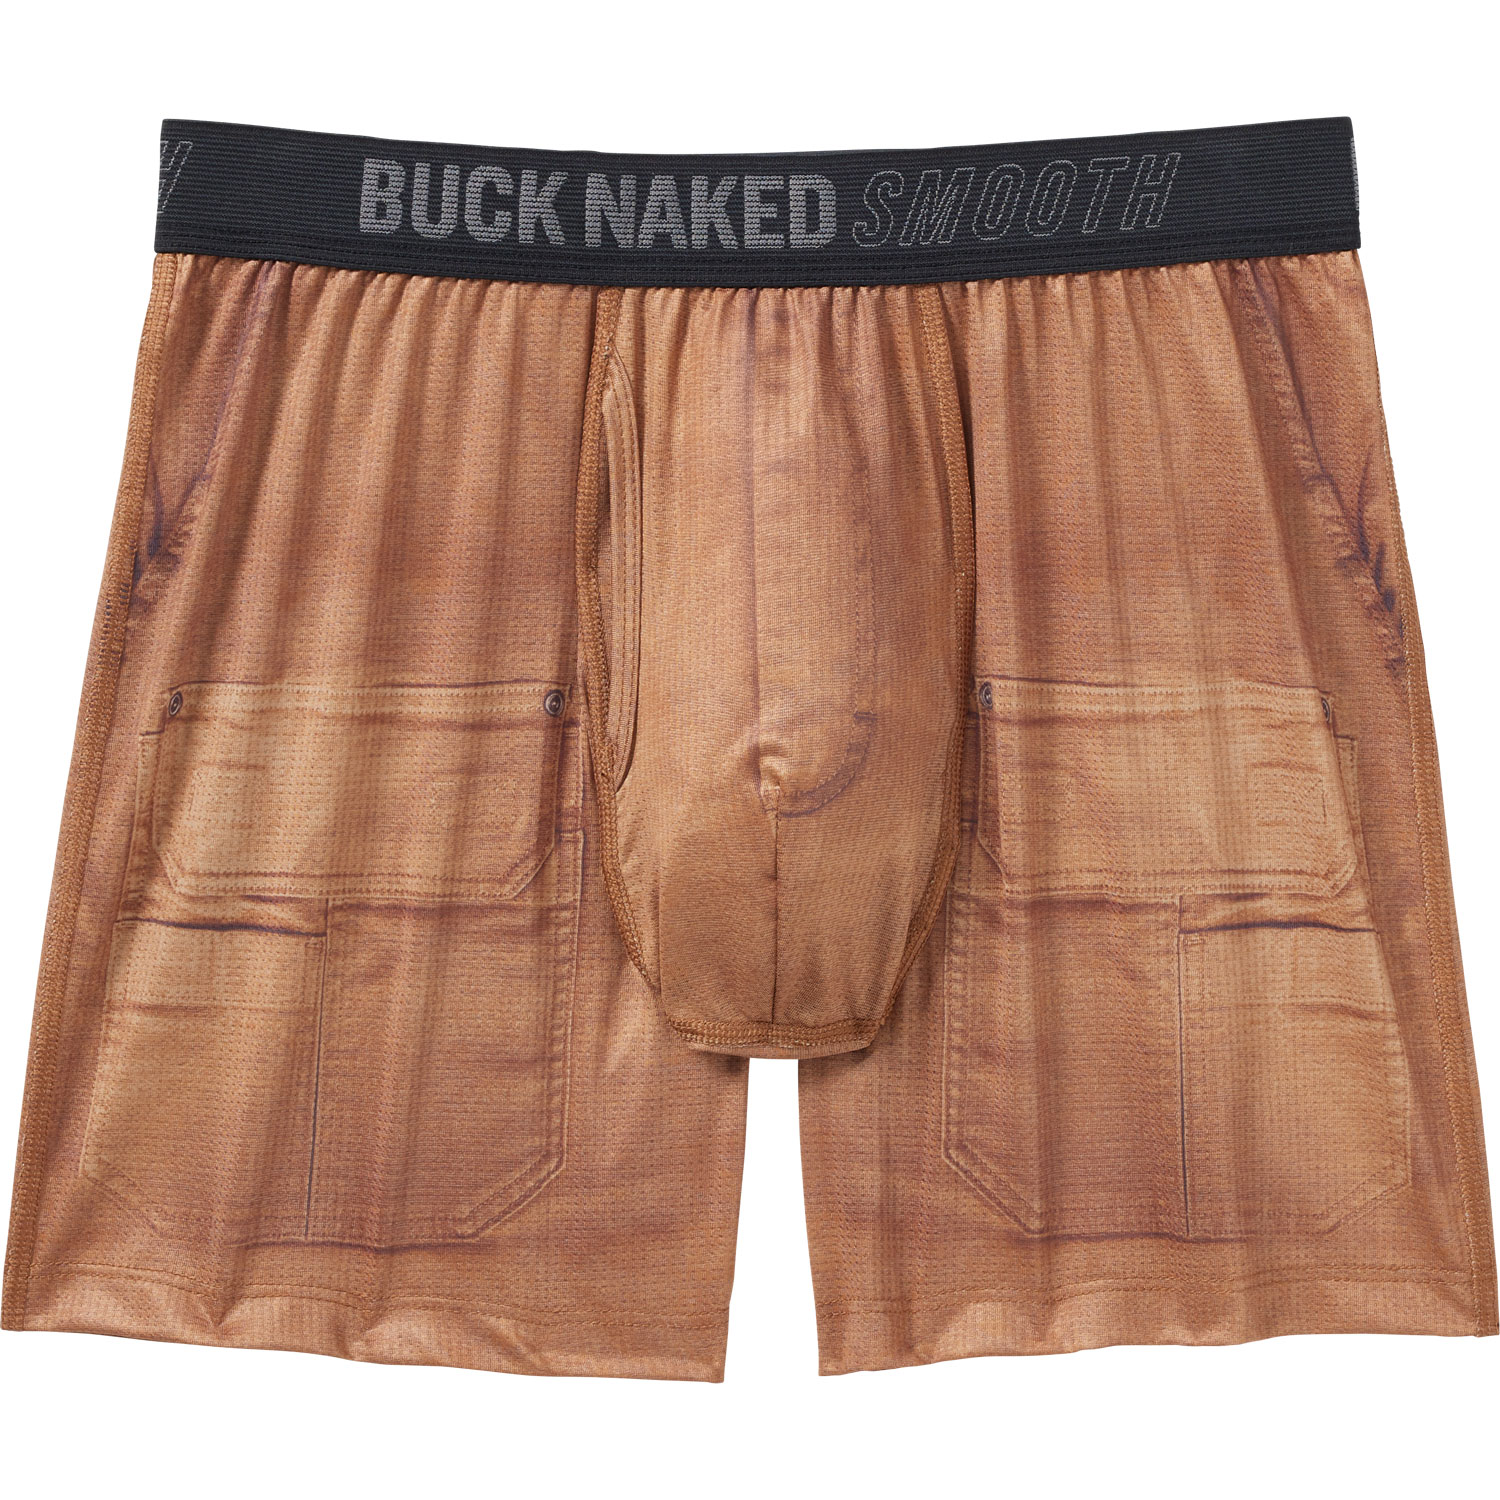 1 Pair Duluth Trading Buck Naked Boxer Brief in Fishing Lure Hook 76715